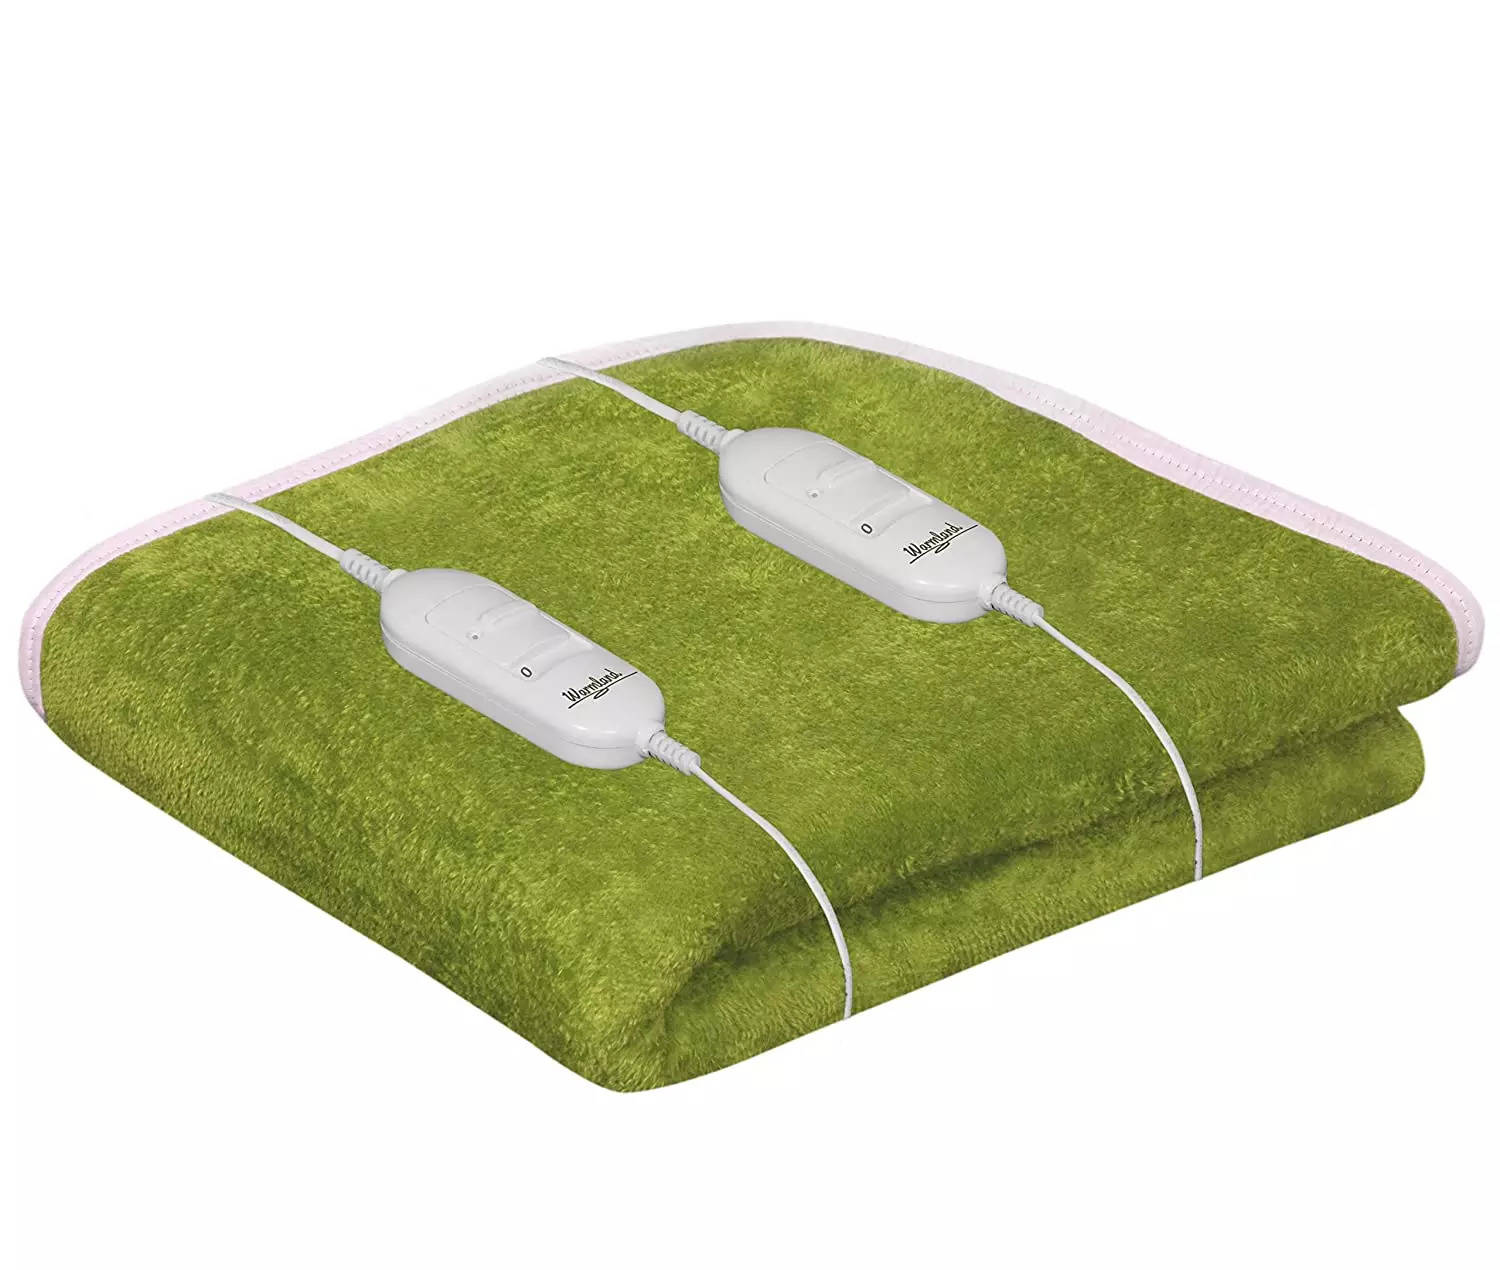 electric blankets for double bed: Best Electric Blankets for Double Bed -  The Economic Times